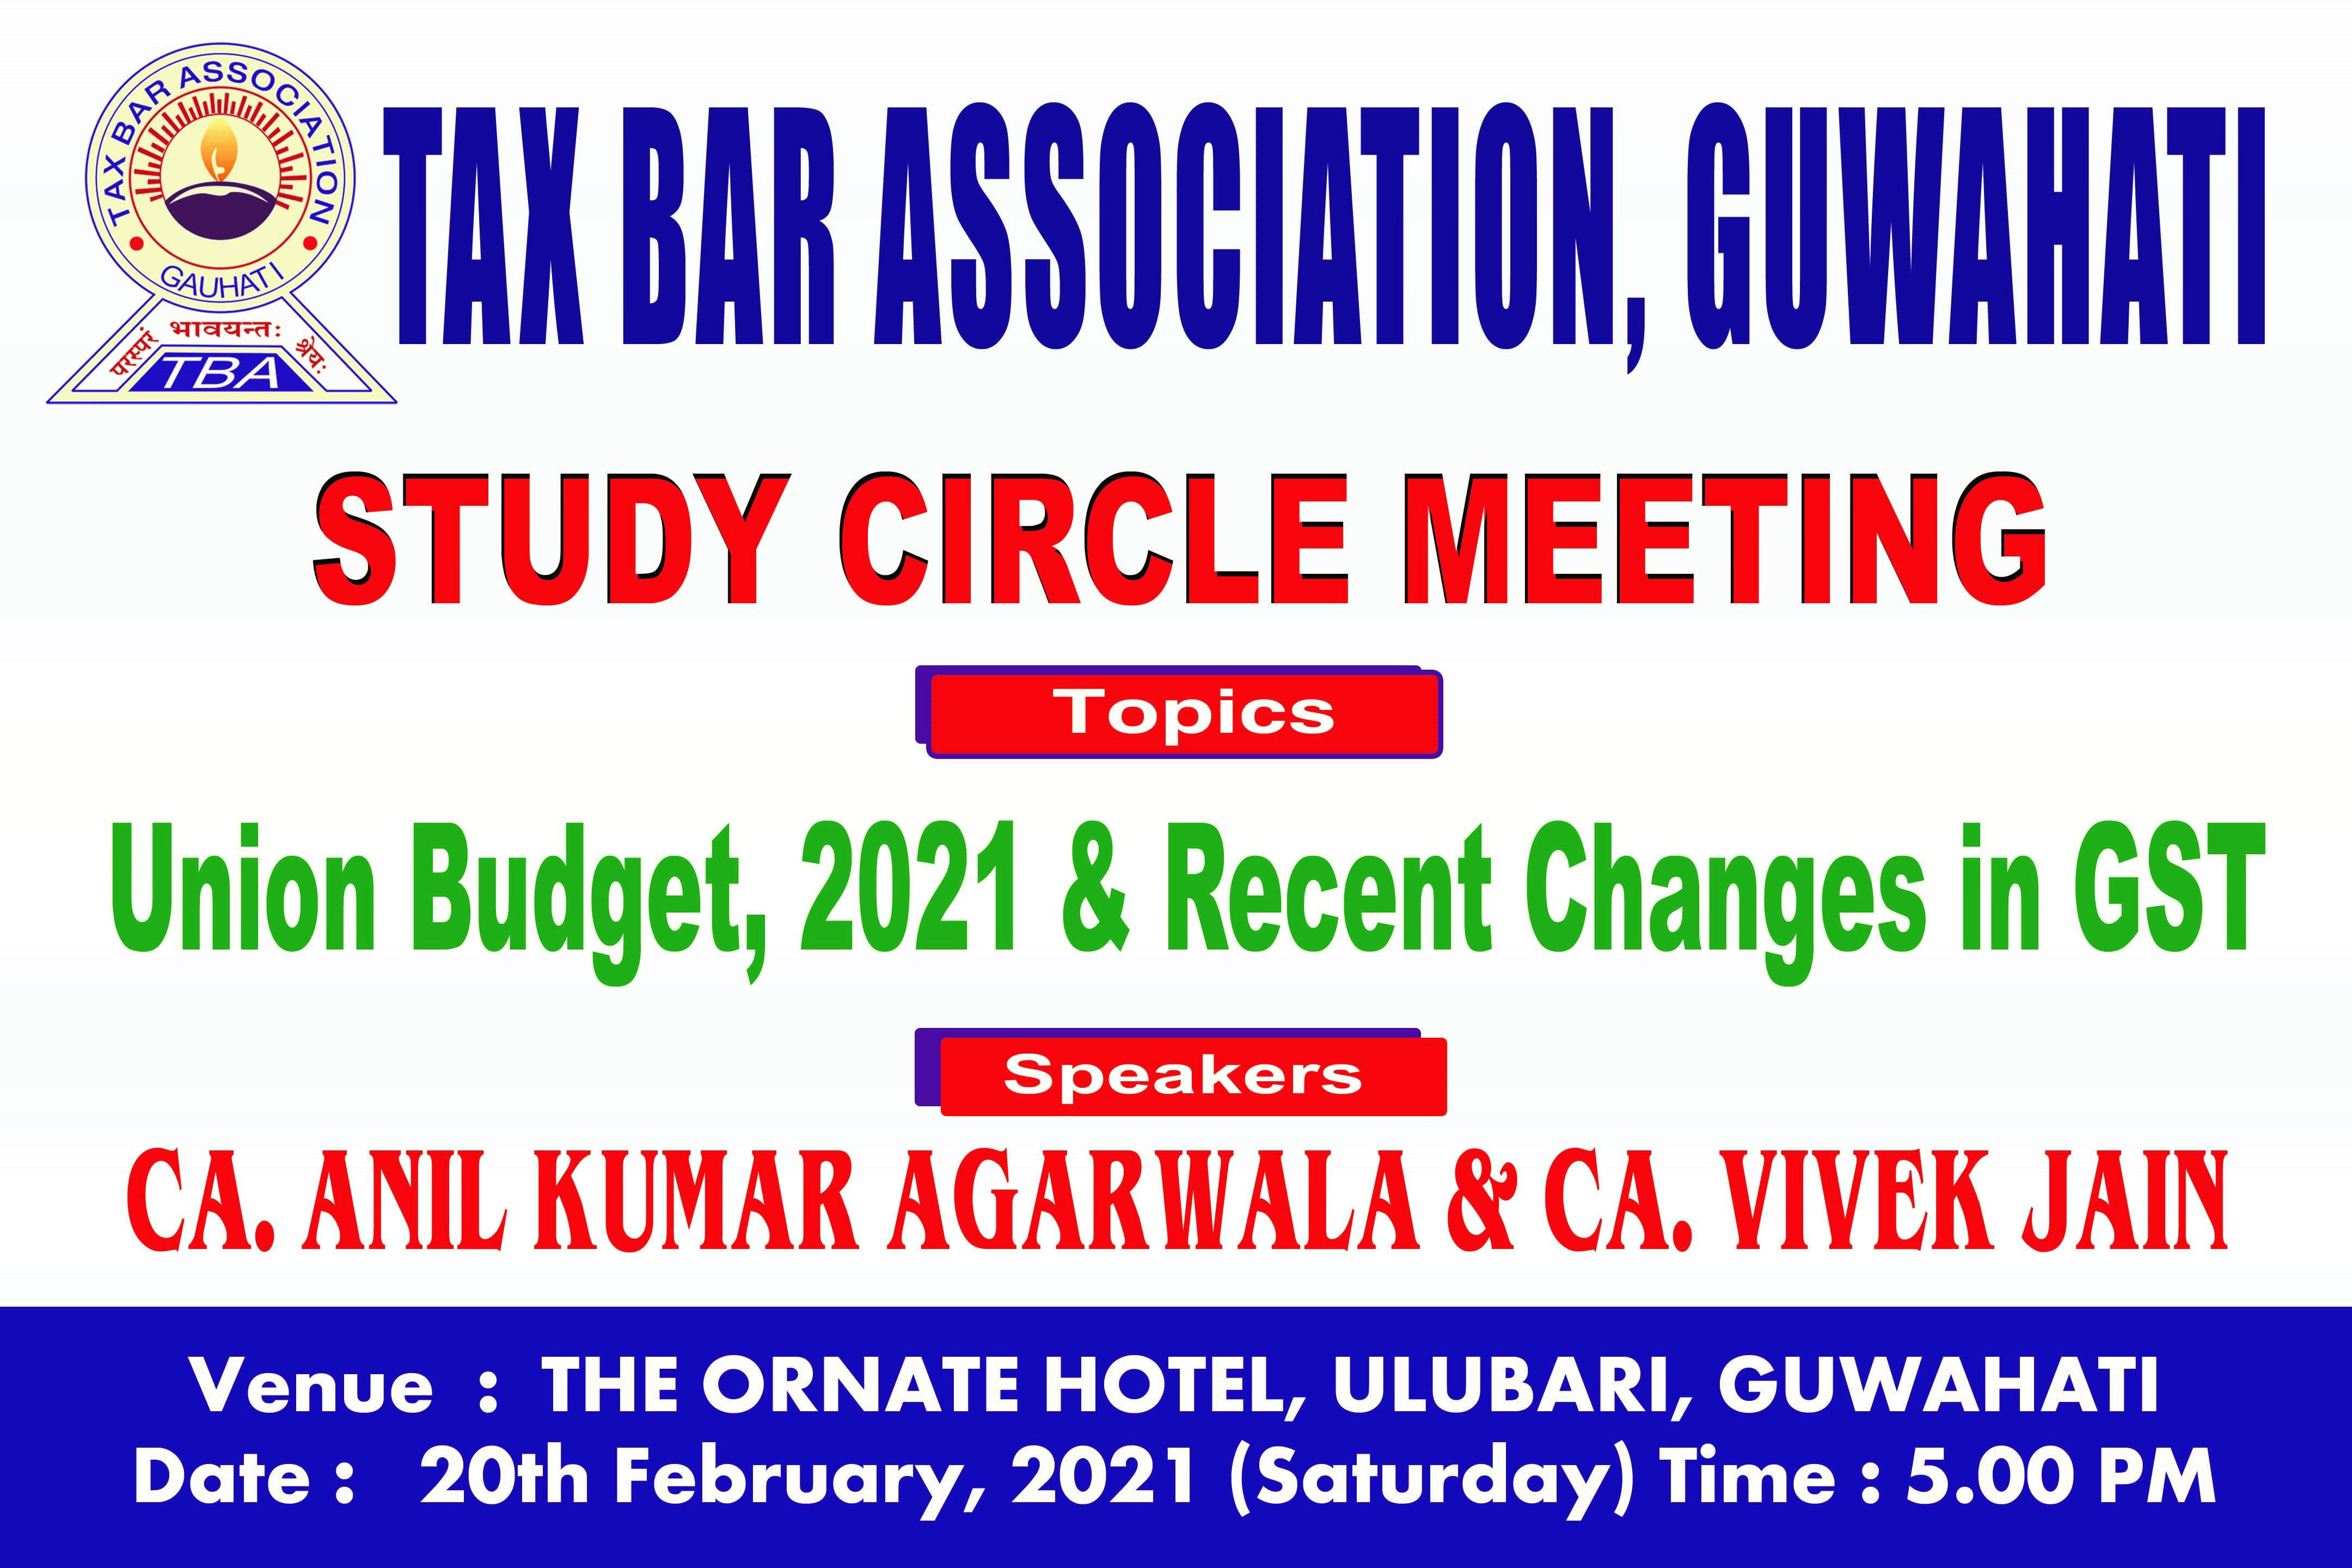 Study Circle Meeting on Union Budget, 2021 & Recent Changes in GST